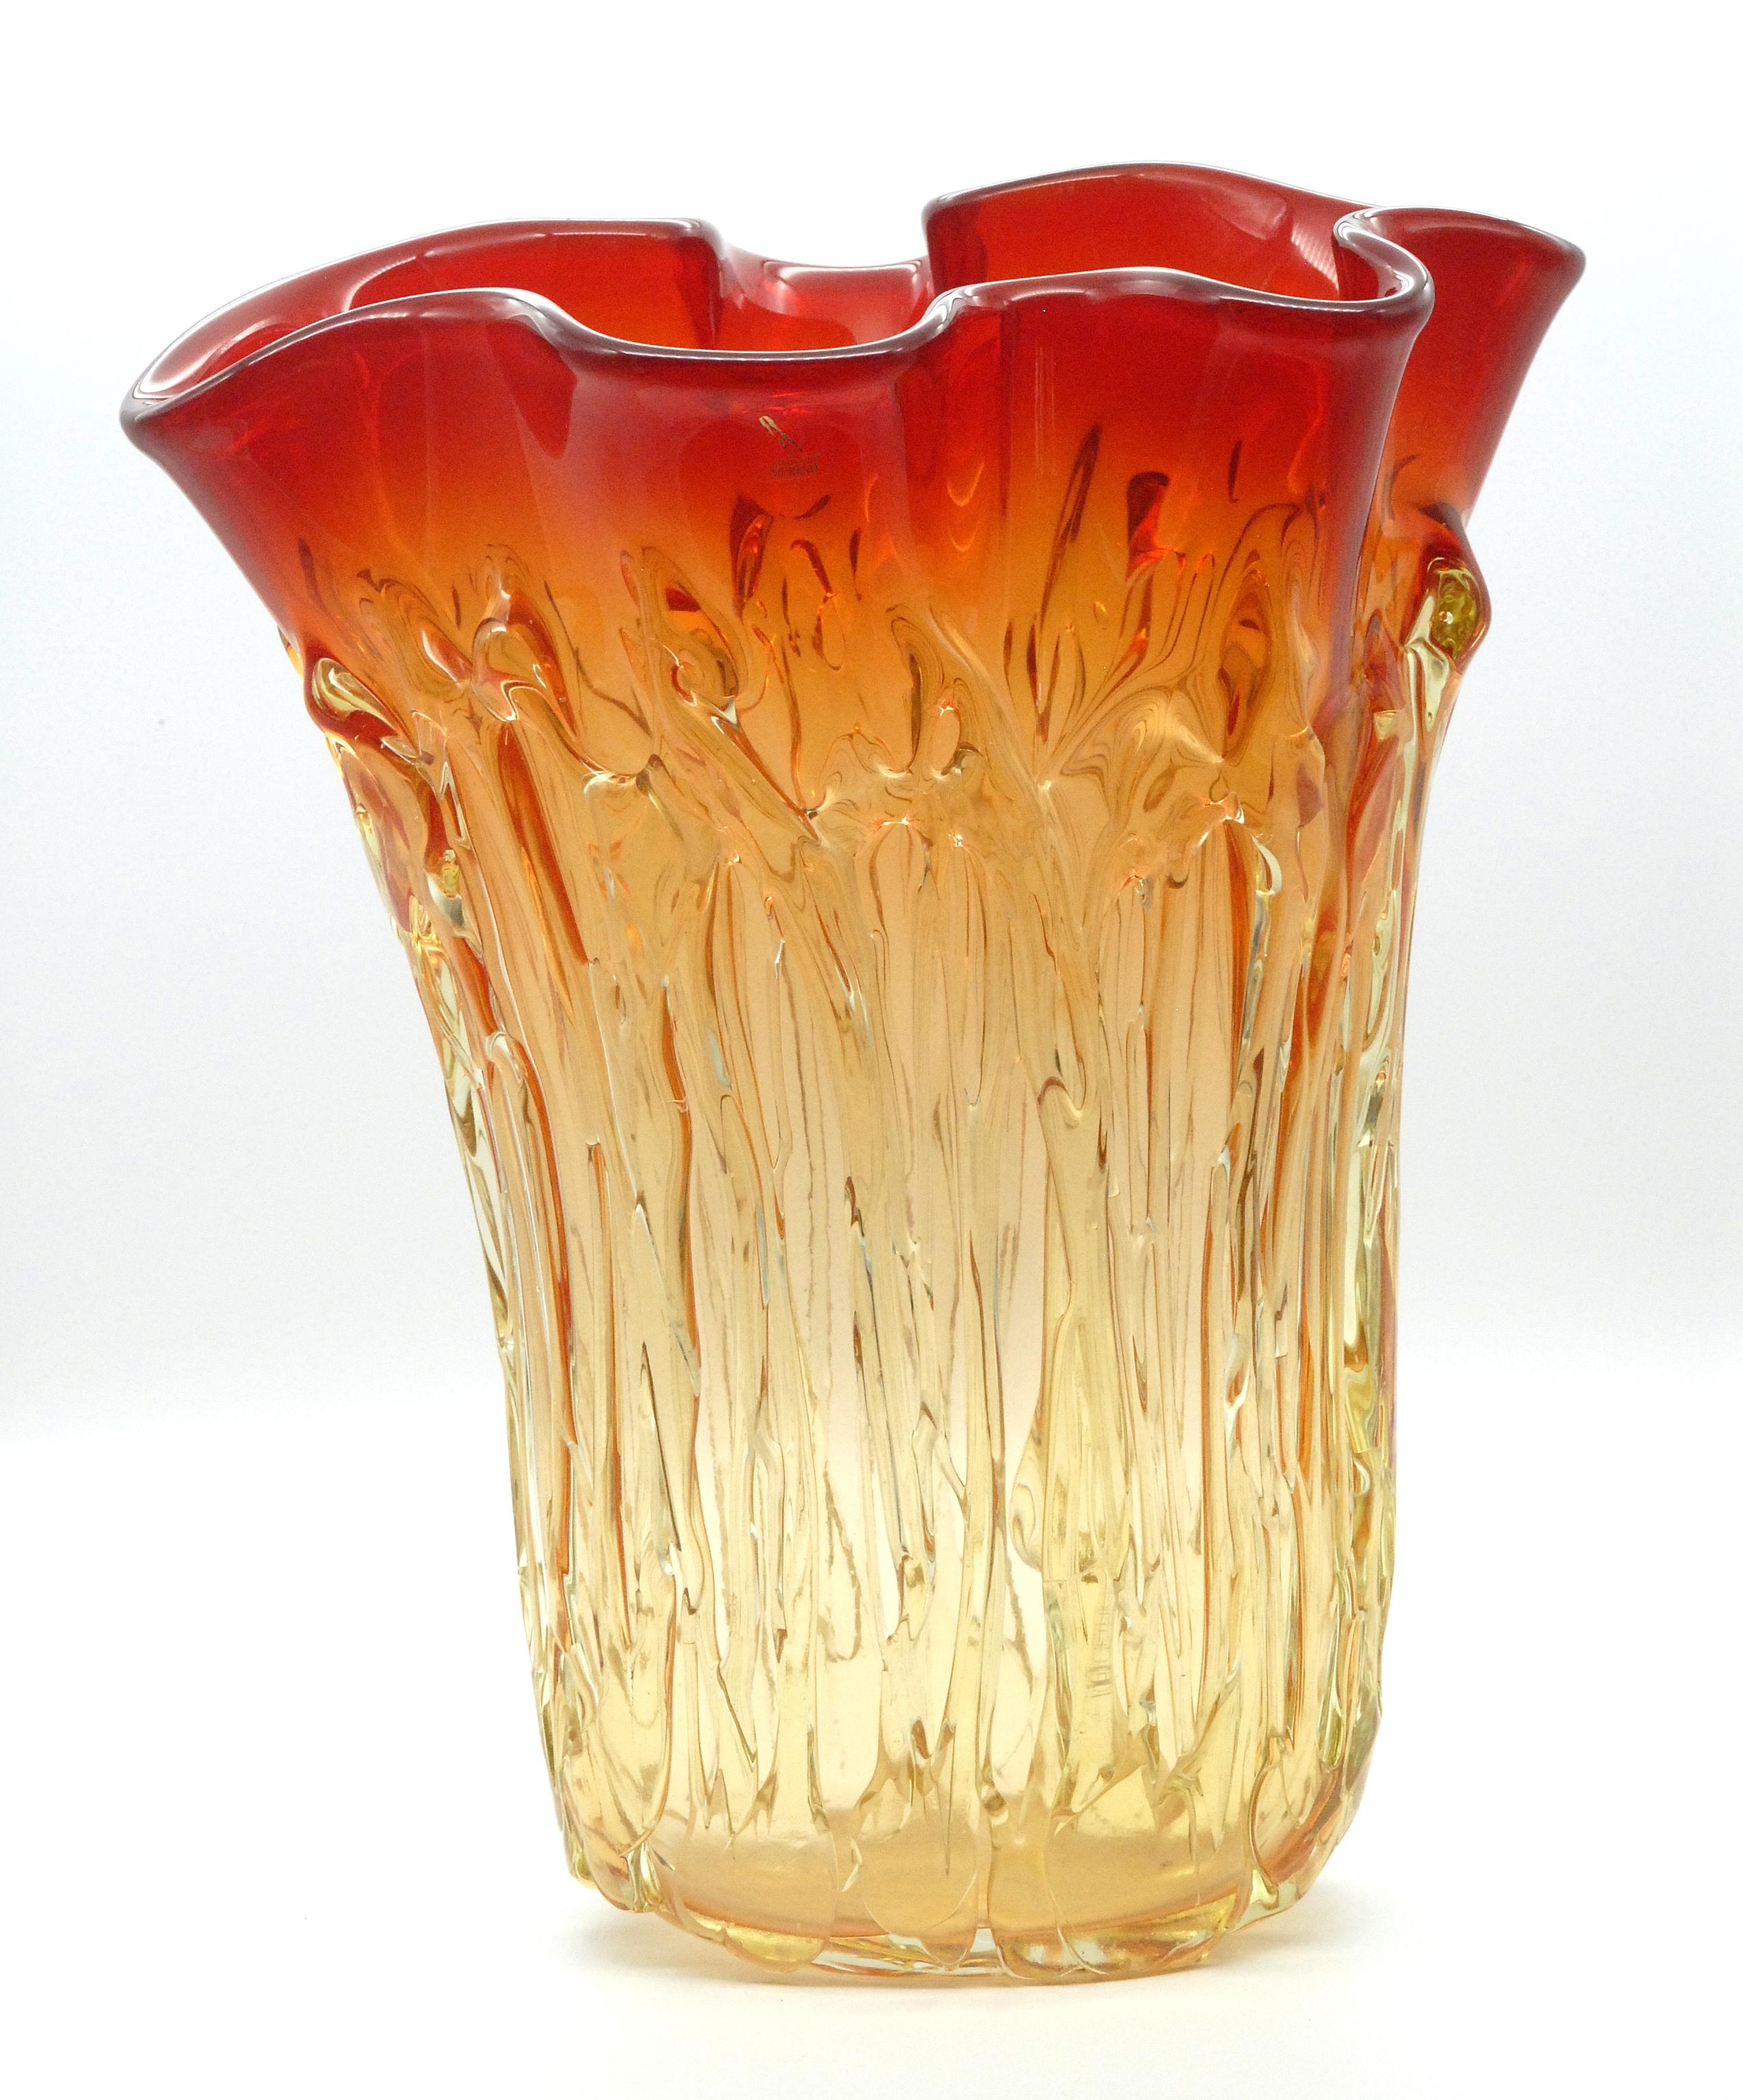 A very large and heavy glass vase by Enrico Cammozza, signed on the base and with a label on the outside of the body. Freeform shaped neck rim graduating from deep orange down to a very pale yellow at the base. Lovely moulding on the body of grass